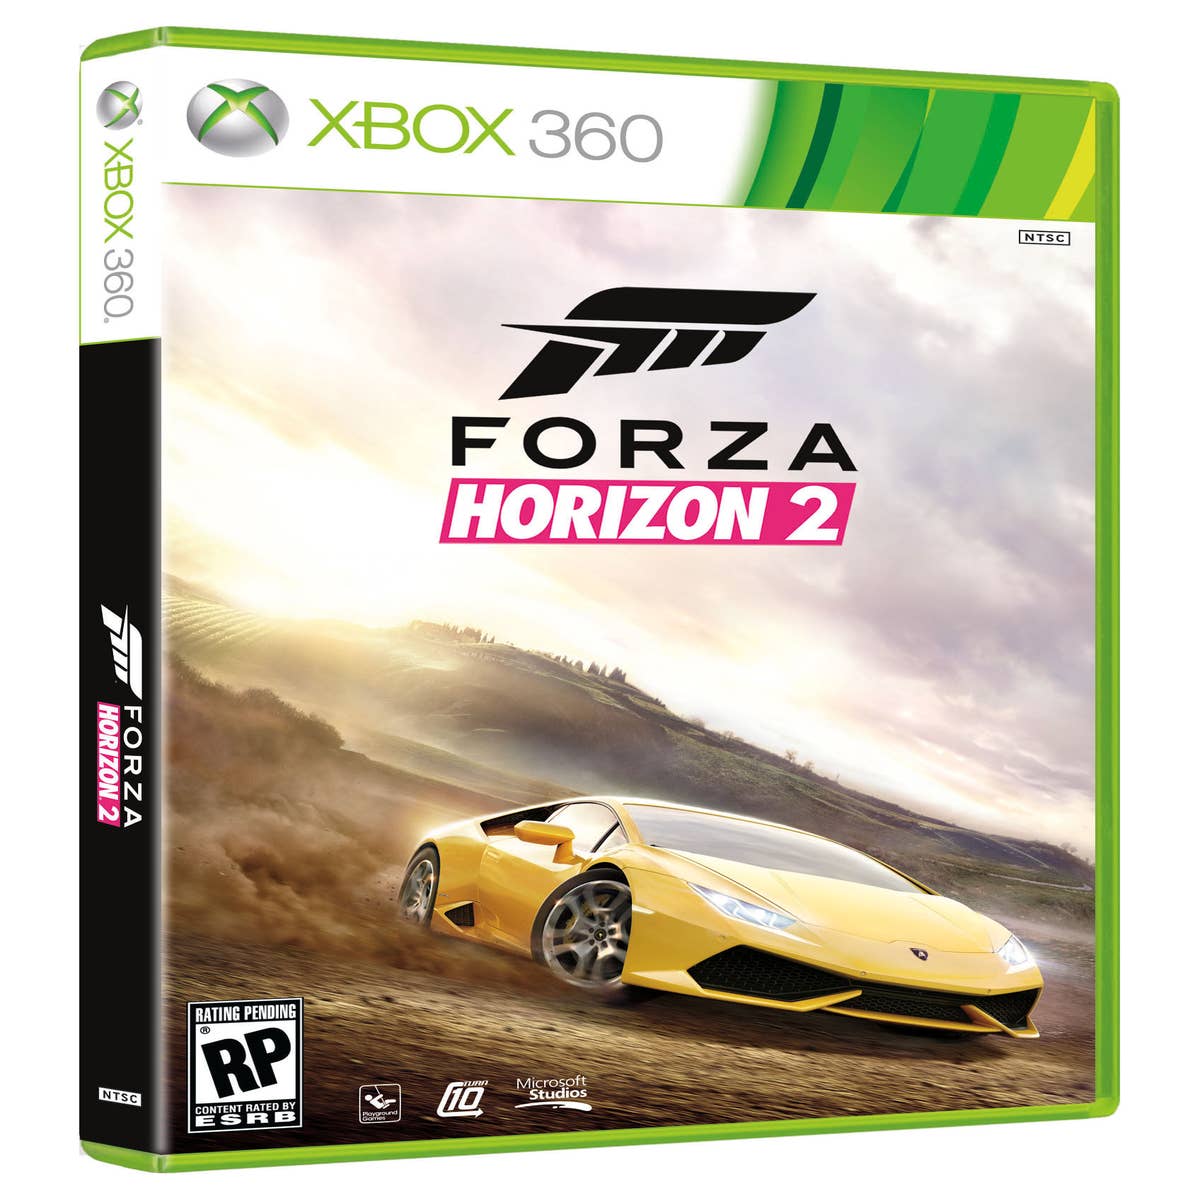 No Forza Horizon 2 DLC planned for Xbox 360 - The Tech Game